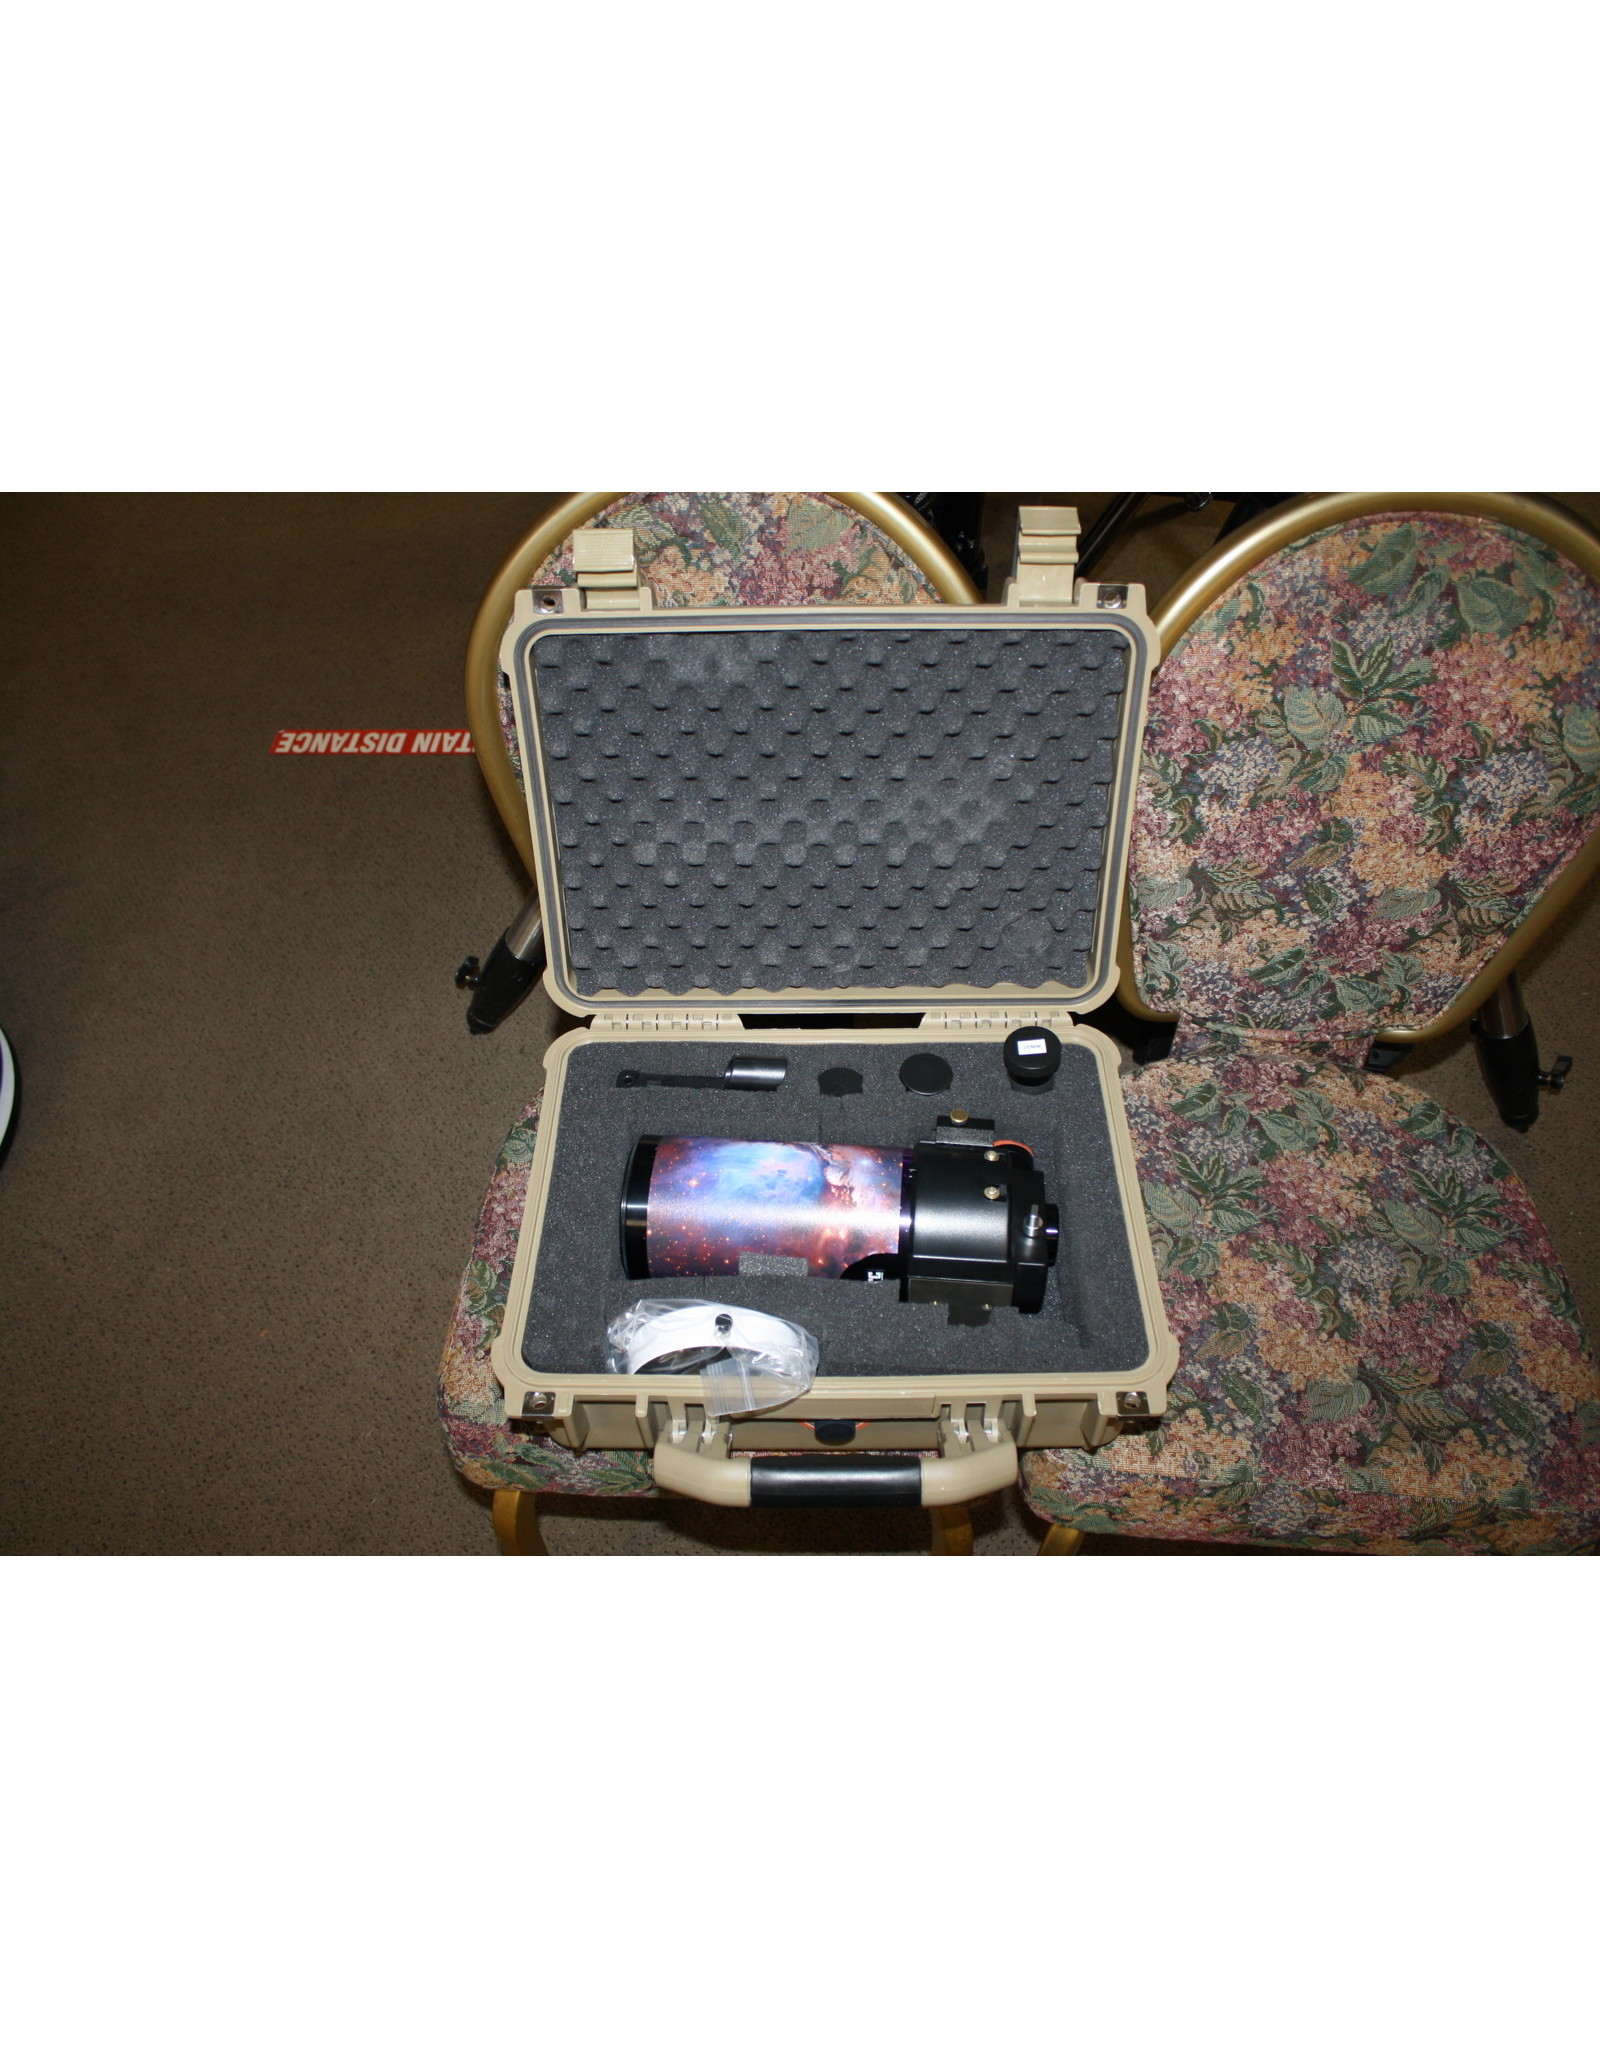 Meade Meade ETX90 MAK Optical Tube  Premier Edition with 3 eyepieces, solar filter and waterproof Apache Case(Pre-owned)